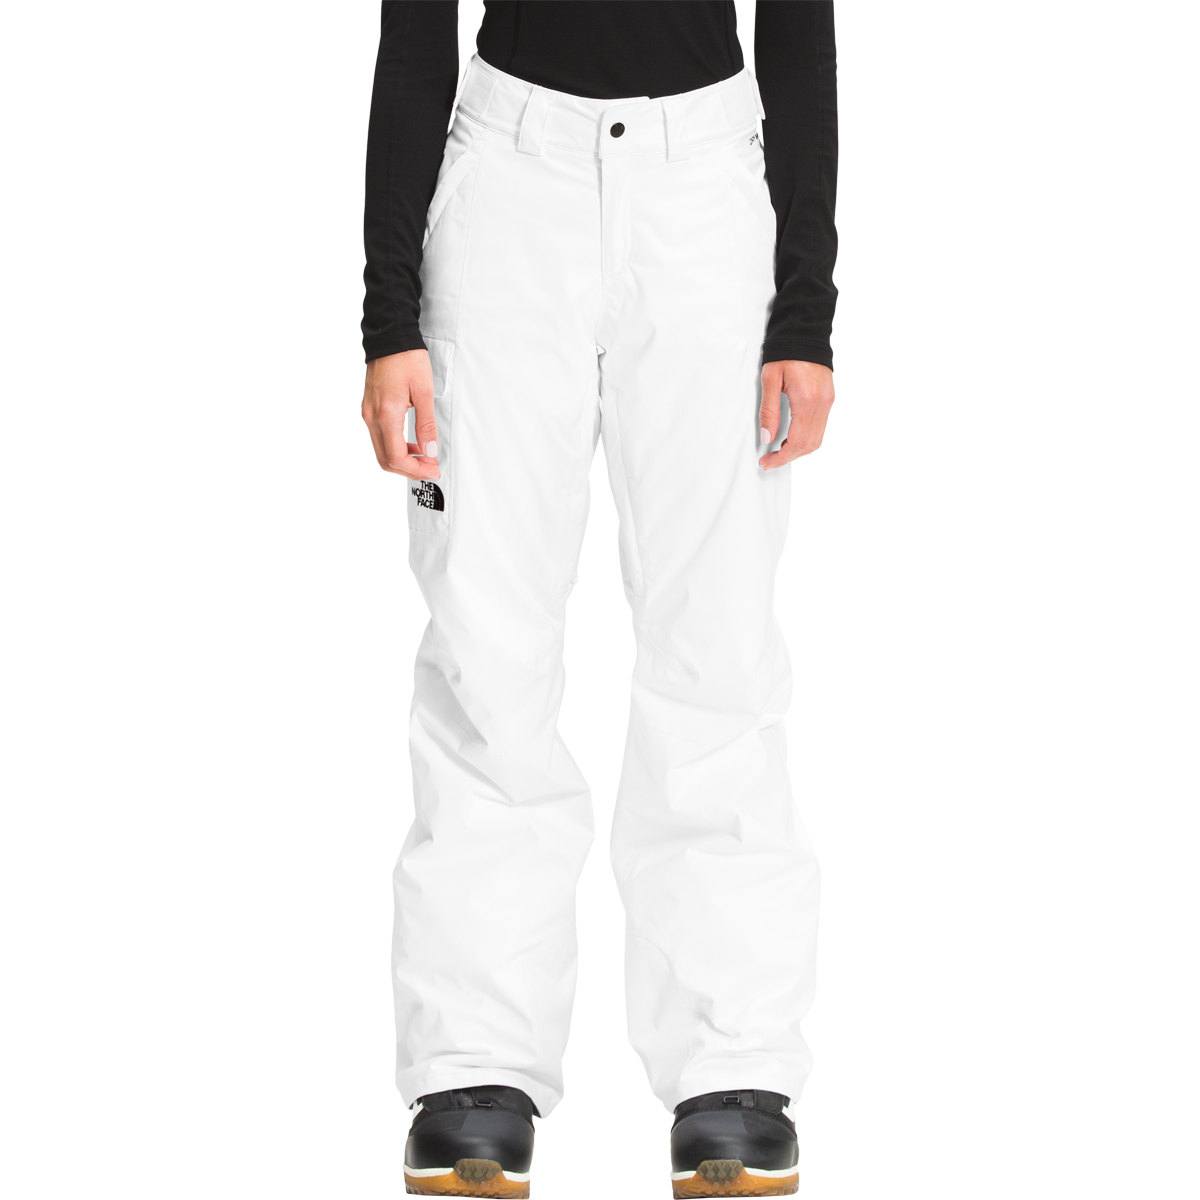 Women's Freedom Insulated Pant alternate view